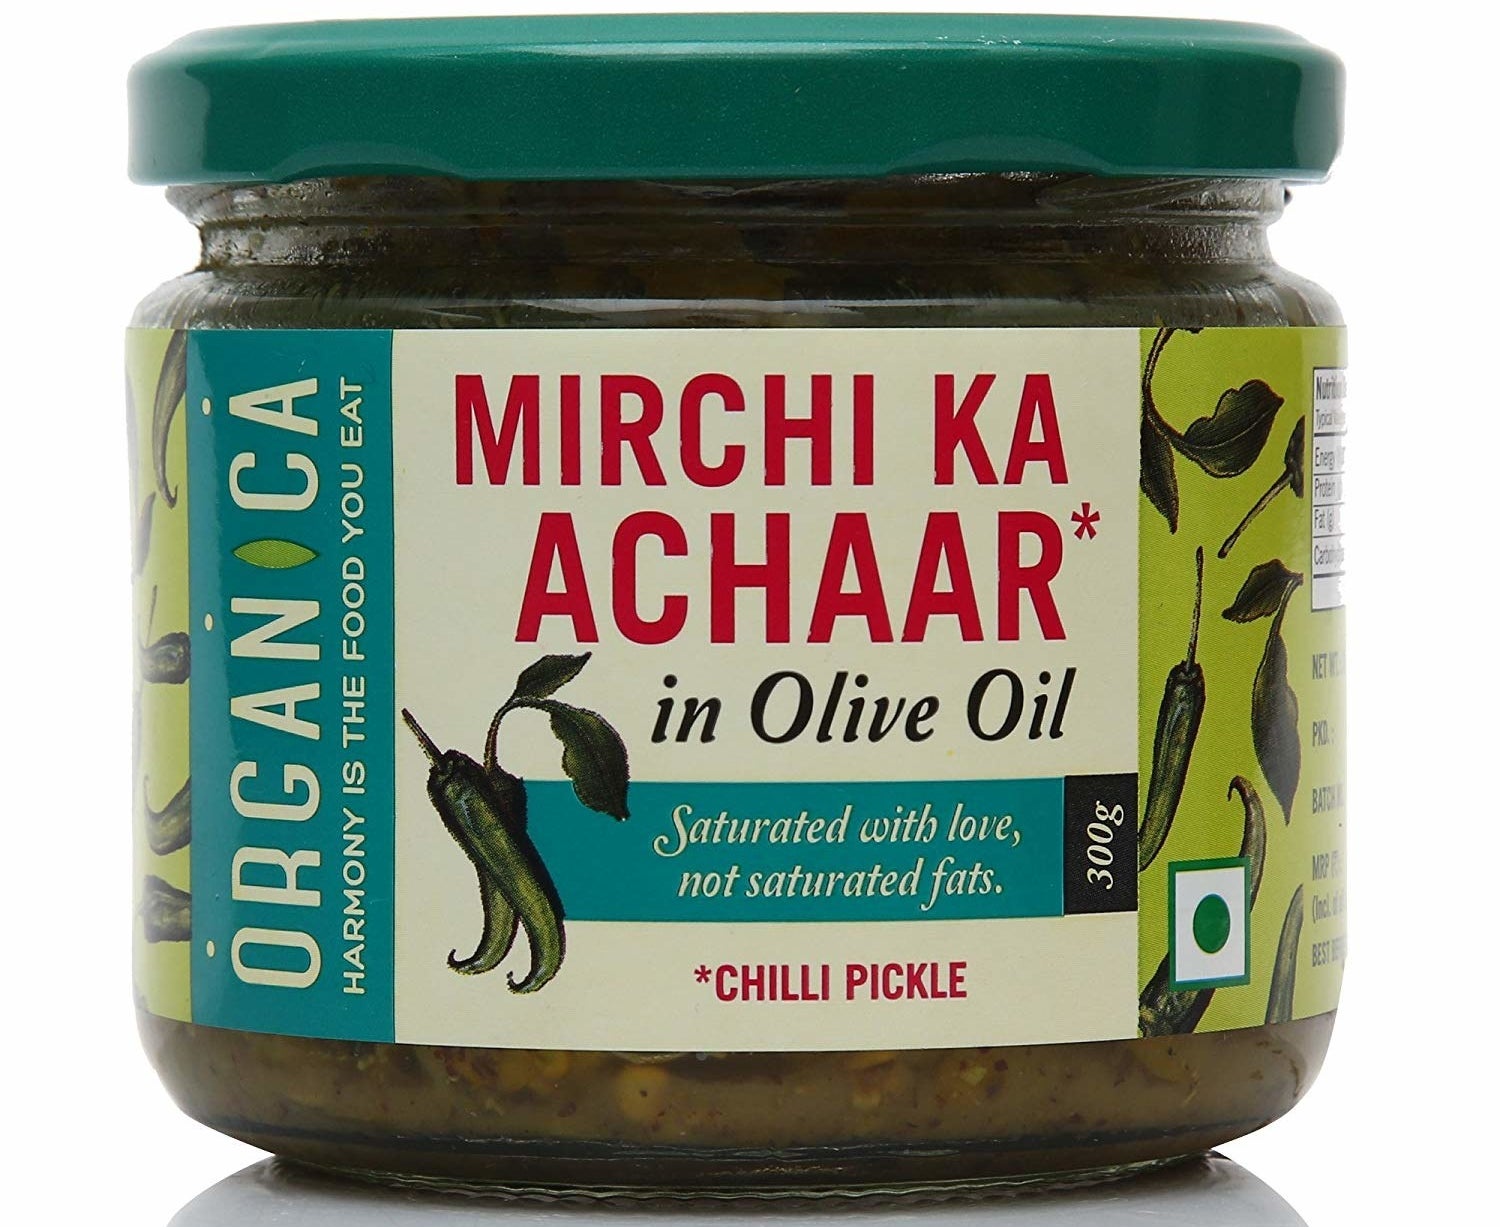 A jar of green chili pickle.